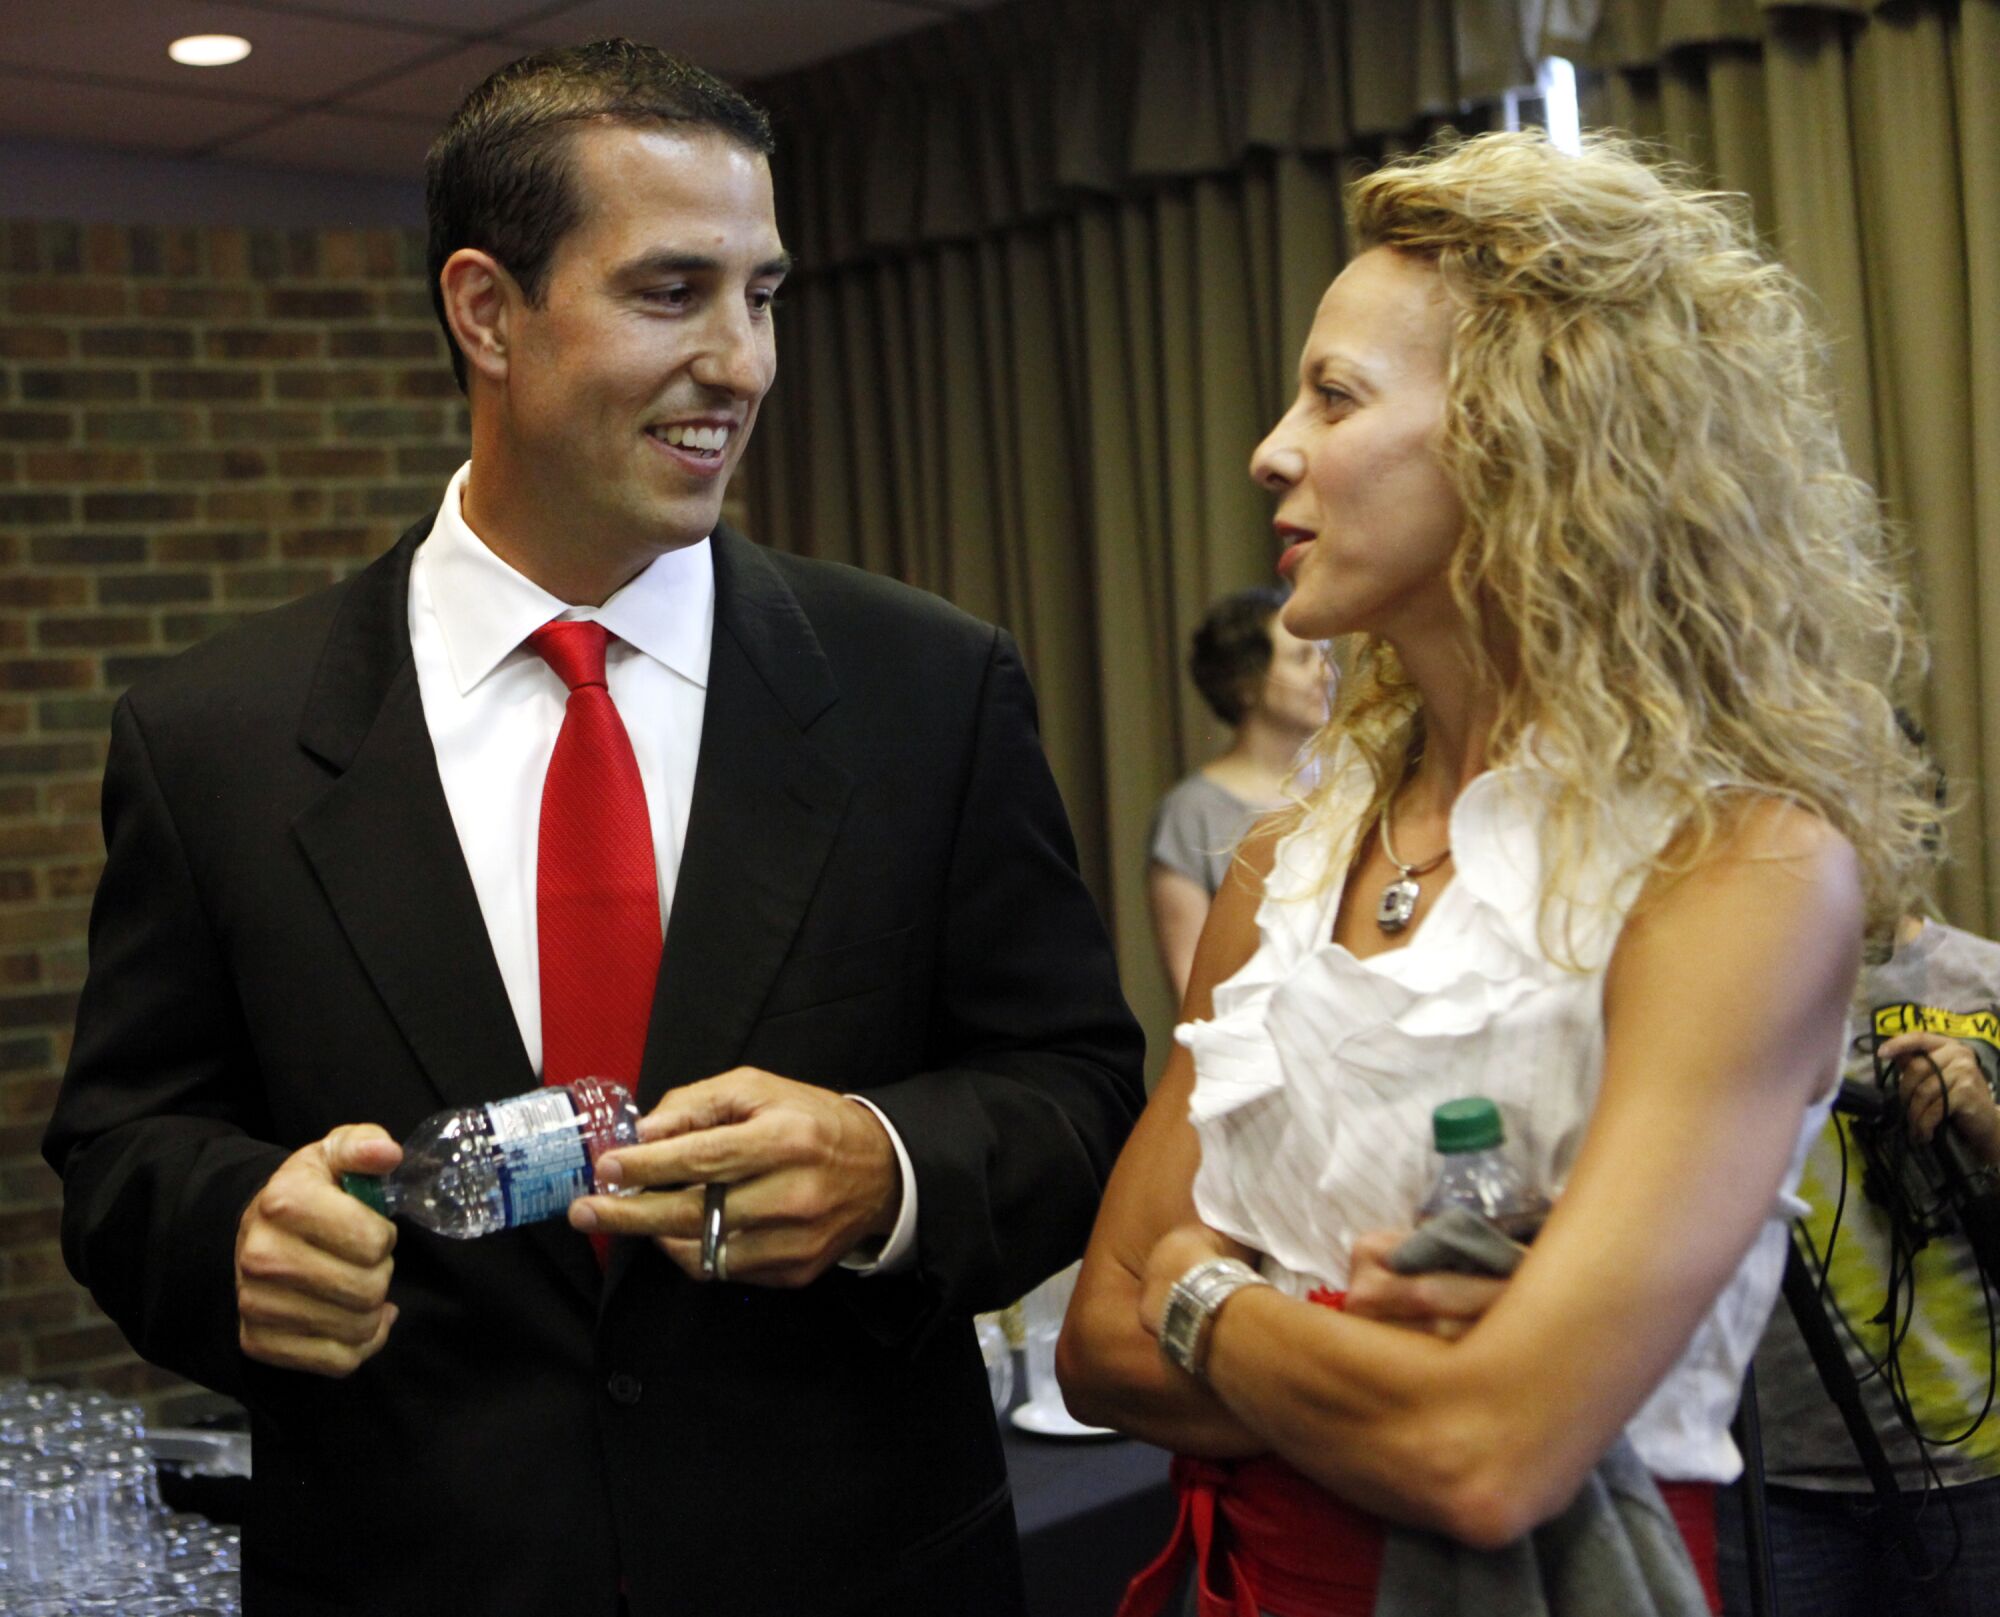 Ohio State coach Luke Fickell, left, shares a moment with his wife, Amy, before a 2011 news conference